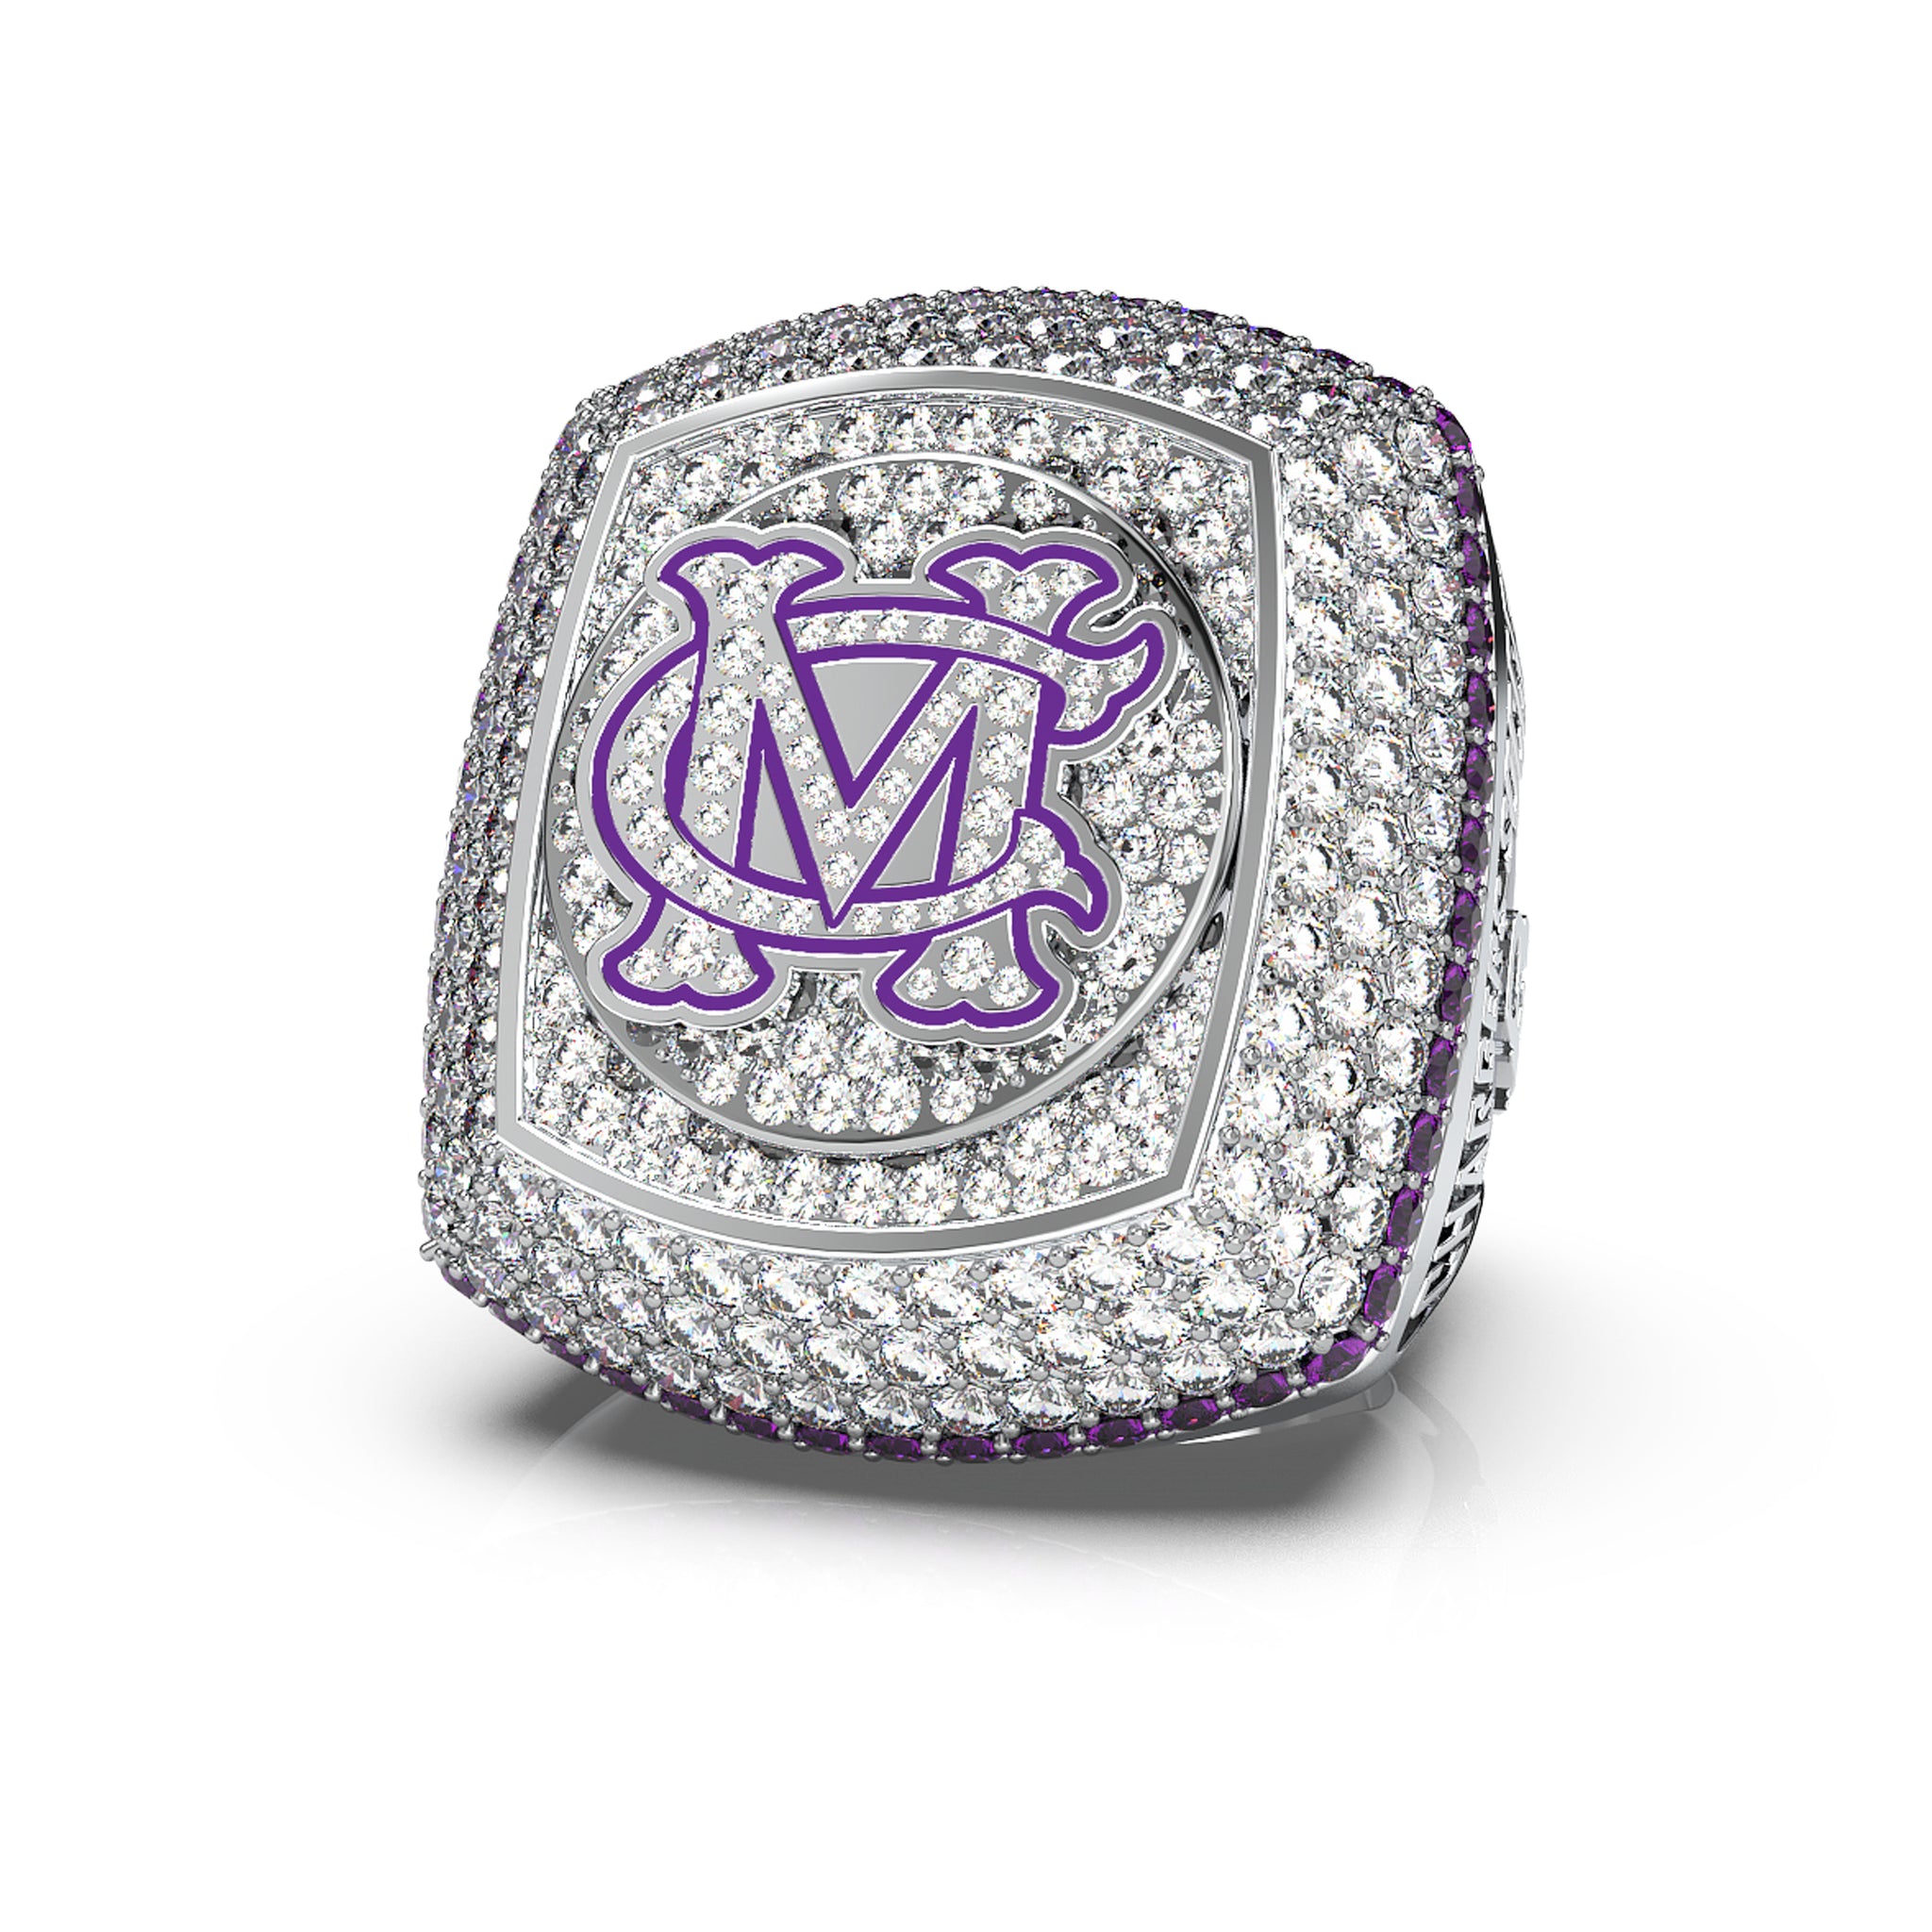 Cox Mill High School - Women's Soccer - 2021 State Championship Ring